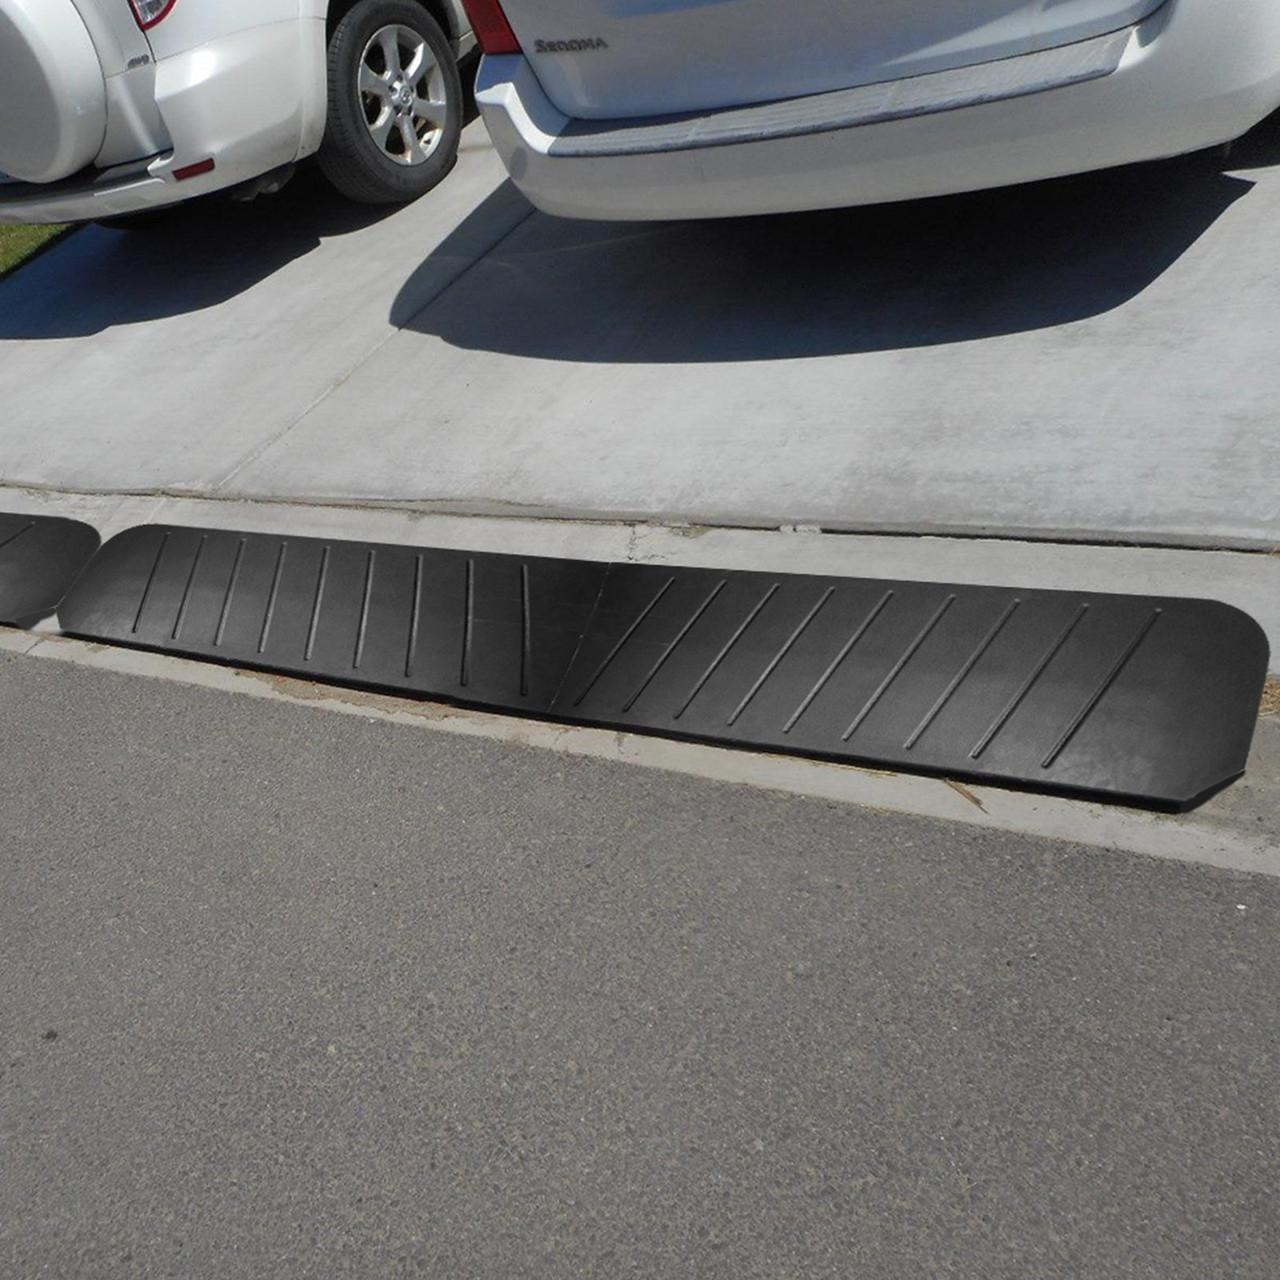 VEVOR Curb Ramp, 2 Pack Rubber Driveway Ramps, Heavy Duty 32000 lbs Weight Capacity Threshold Ramp, 2.6 inch High Curbside Bridge Ramps for Loading Dock Garage Sidewalk, Expandable Full Ramp Set